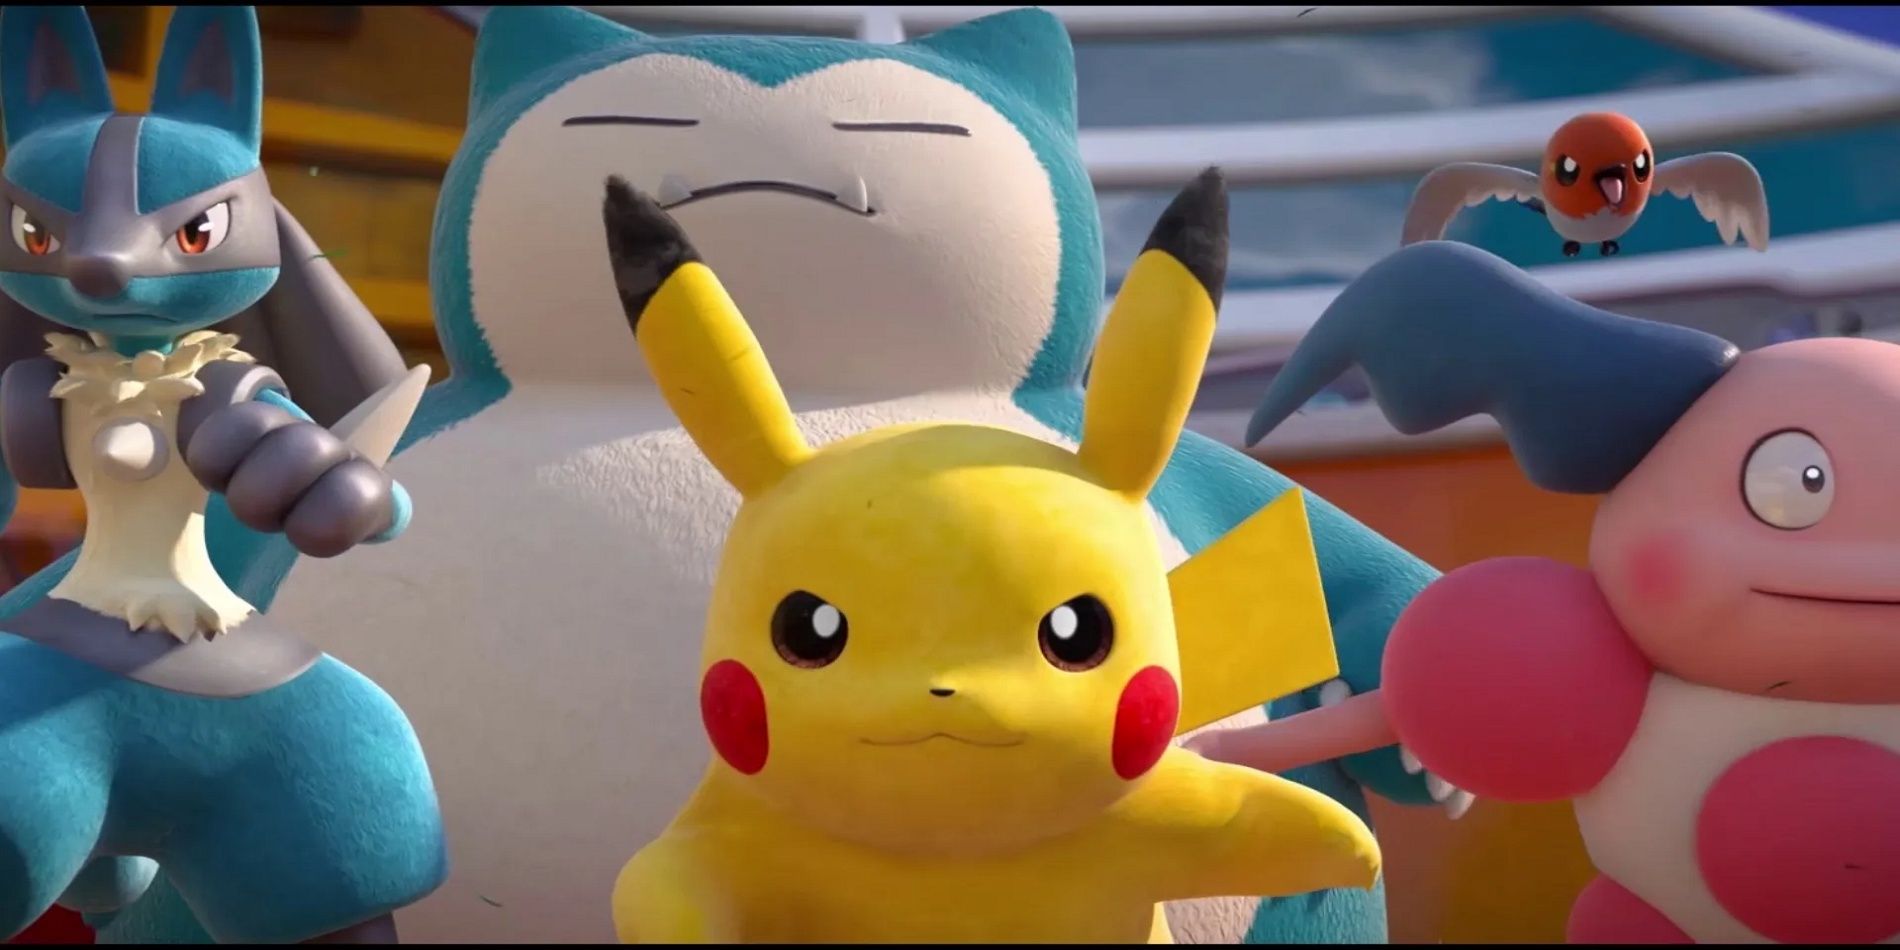 Pikachu and others close-up in Pokémon Go.